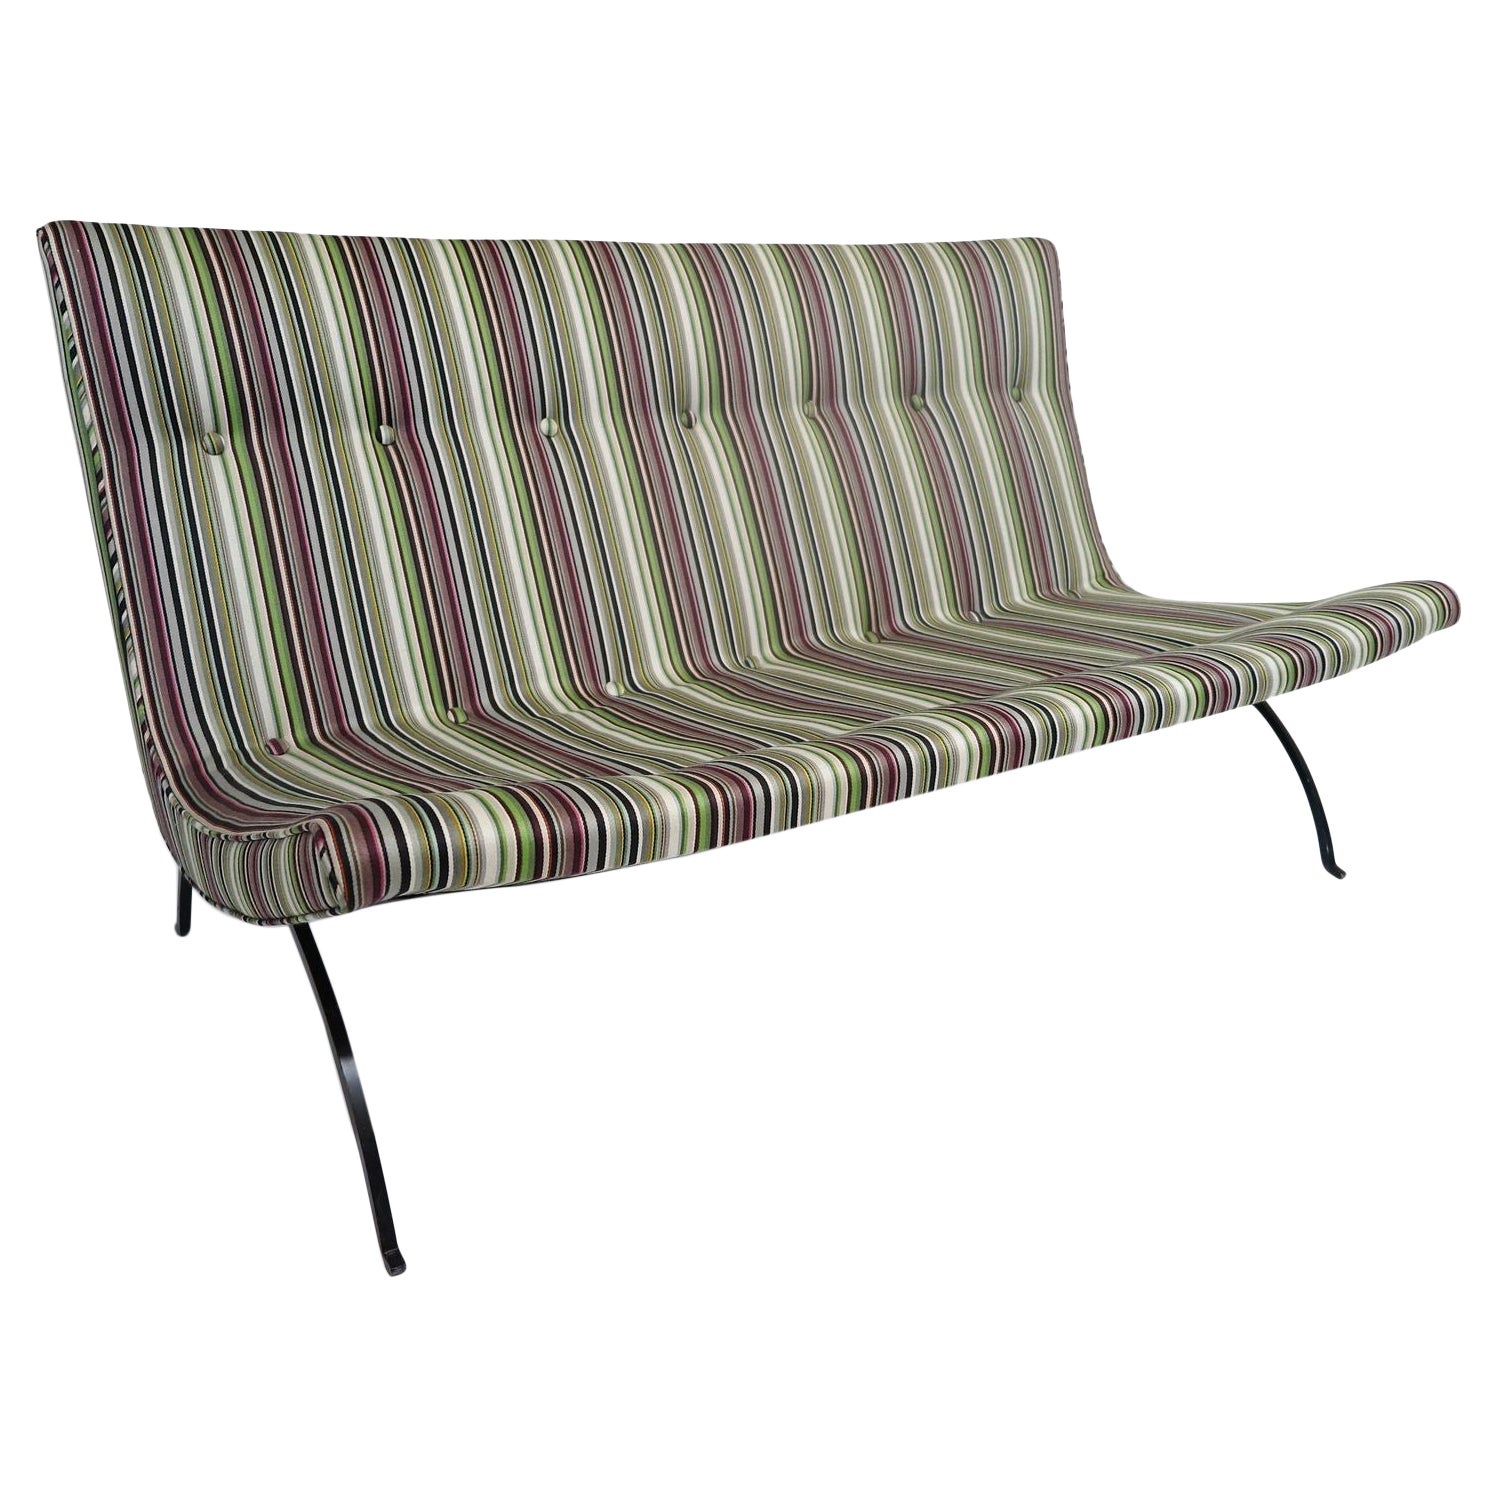 1950's Milo Baughman “Scoop” sofa settee with curved seating, button tufted back, raised on an iron frame.
Measurements
W 50’’ x D 27,5’’ x H 28,25’’
Seat Height 11''